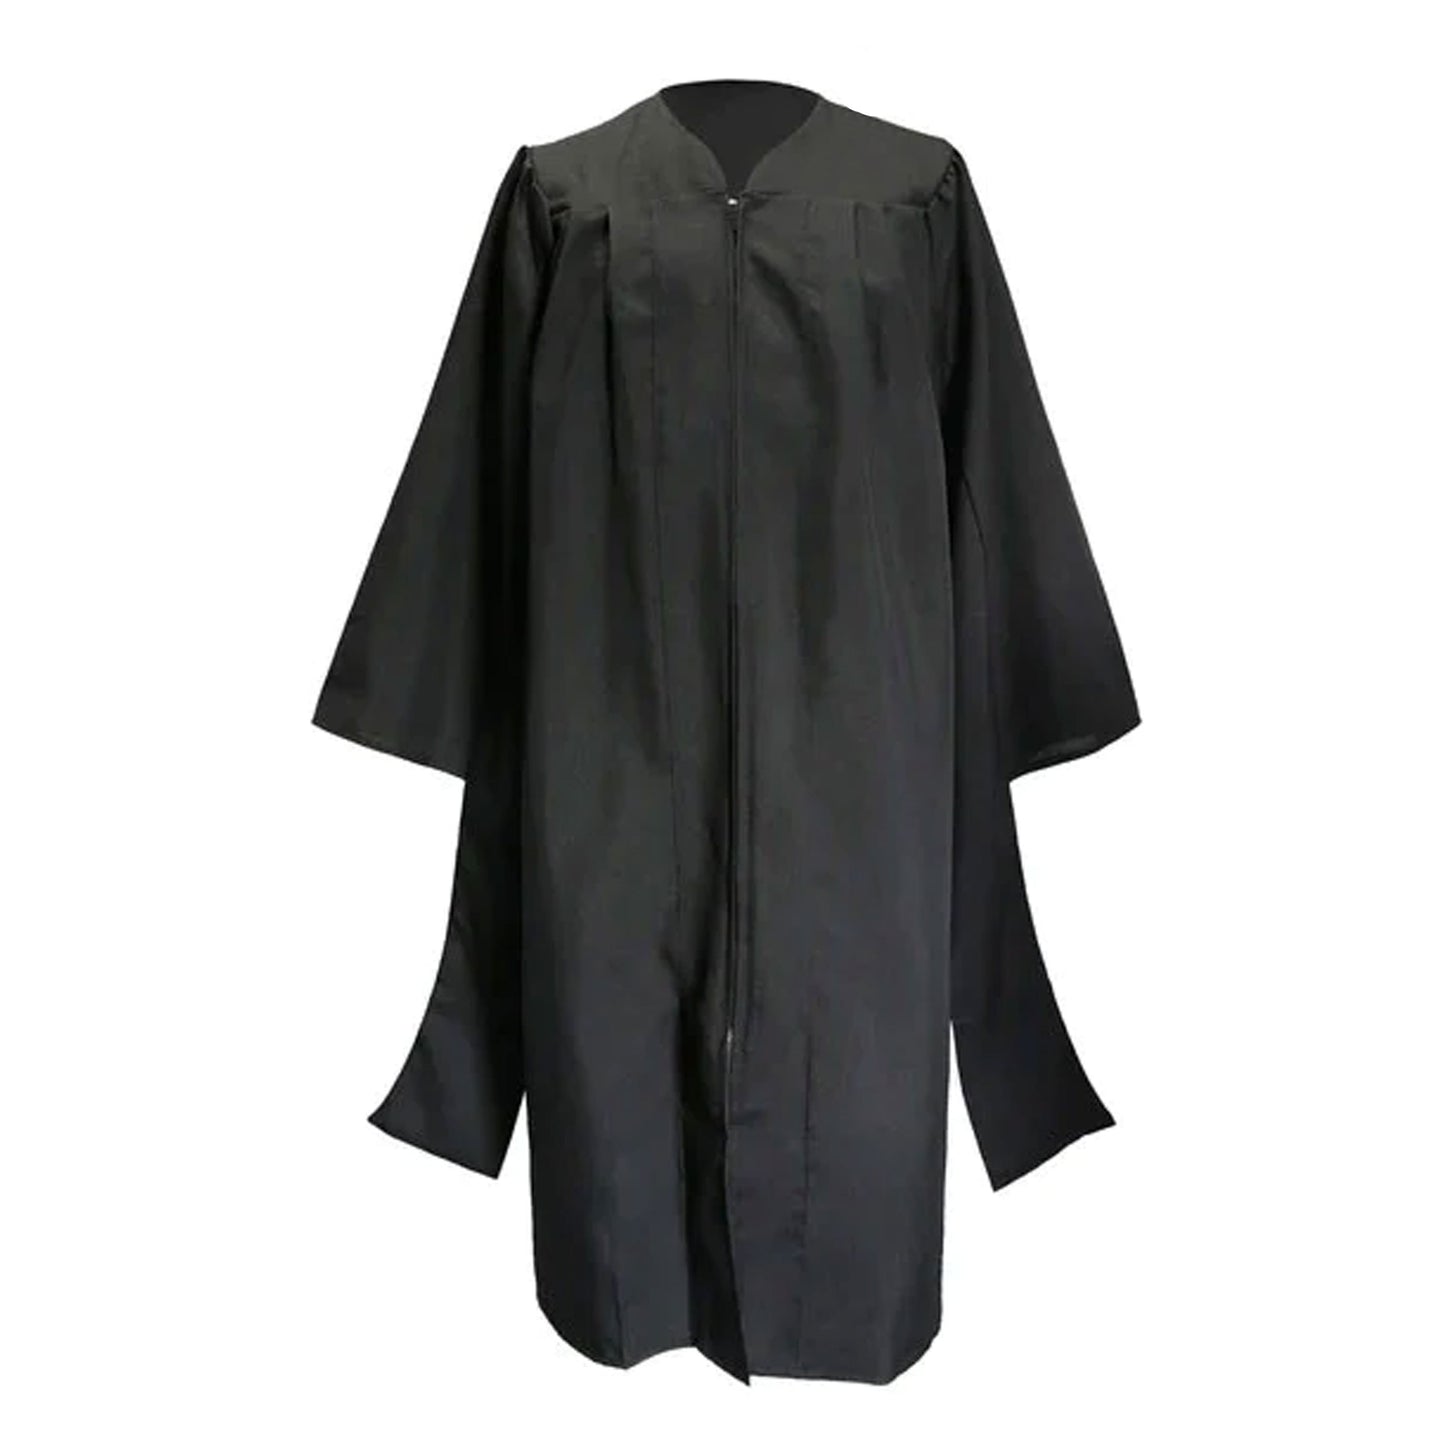 Classic Master Graduation Gown | university gown | university regalia-CA graduation